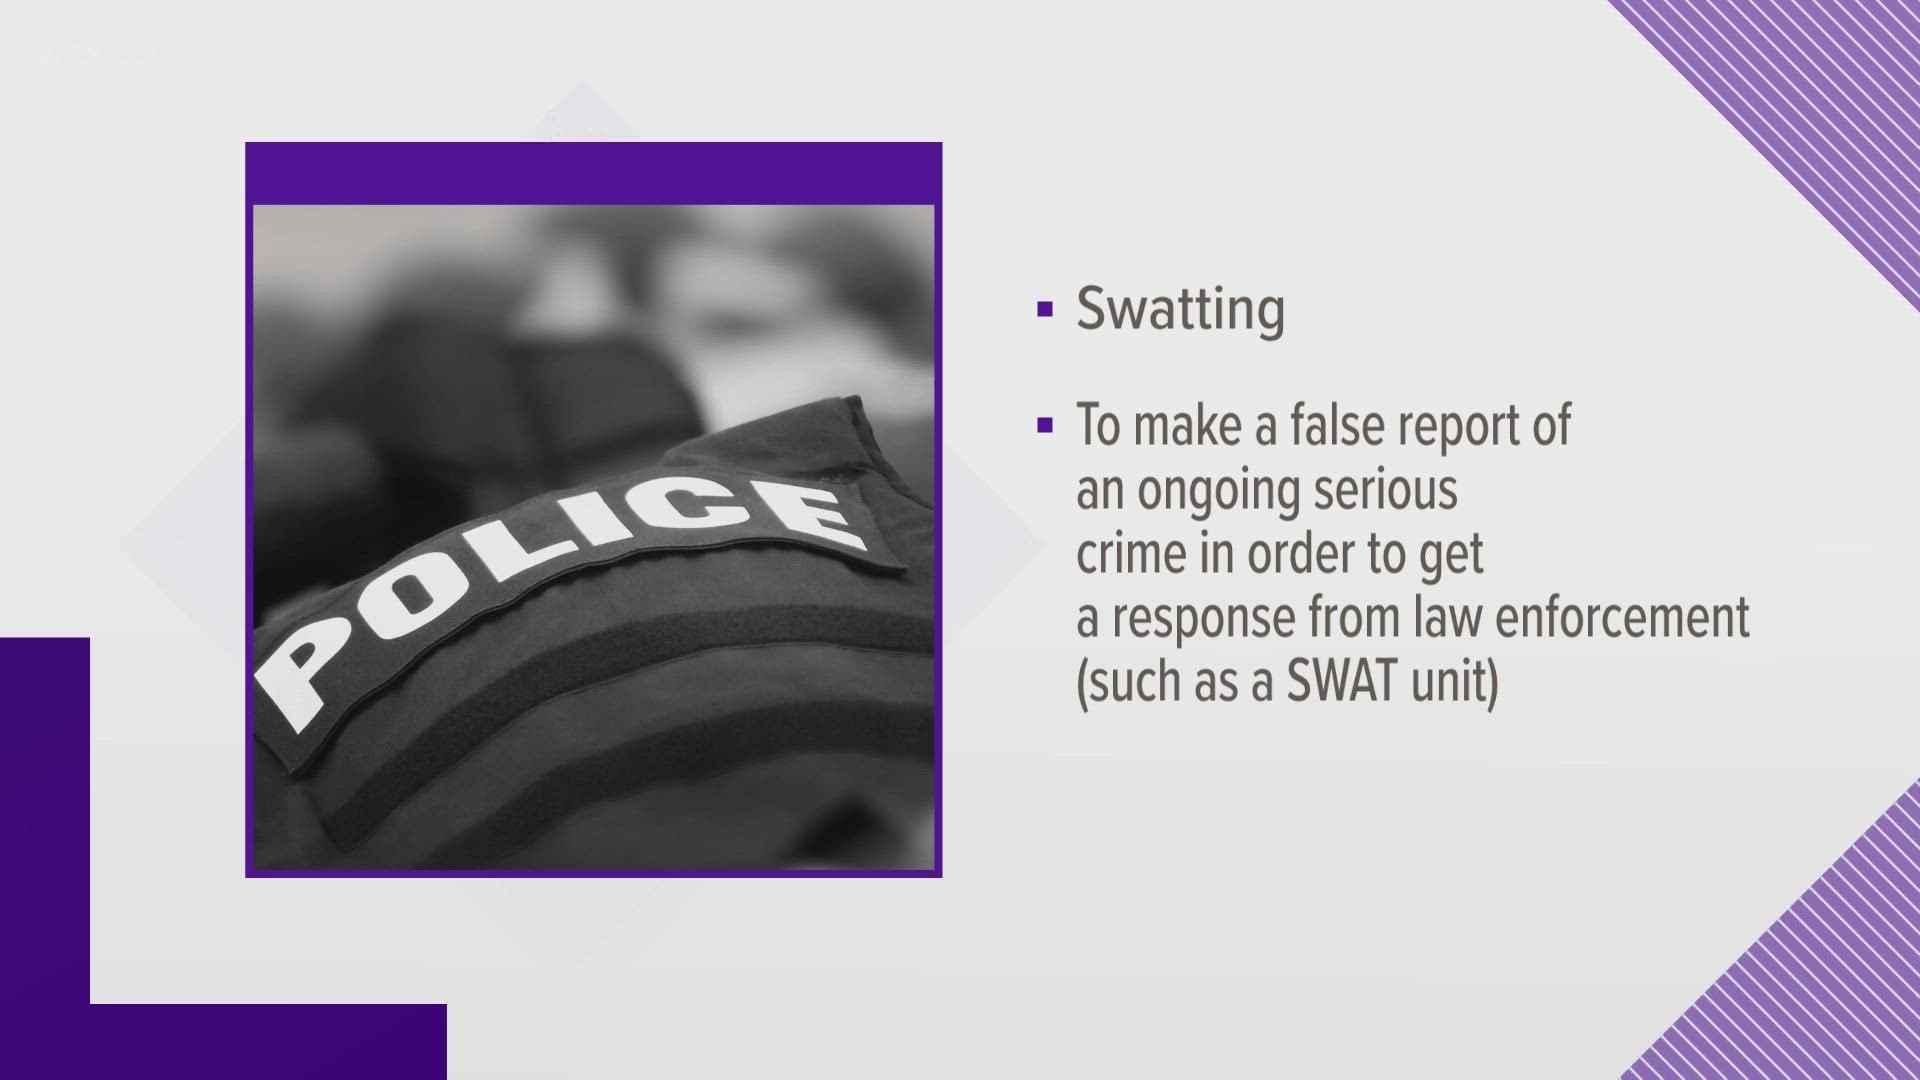 Swatting's definition is to make a false report of an ongoing serious crime in order to get law enforcement to respond.